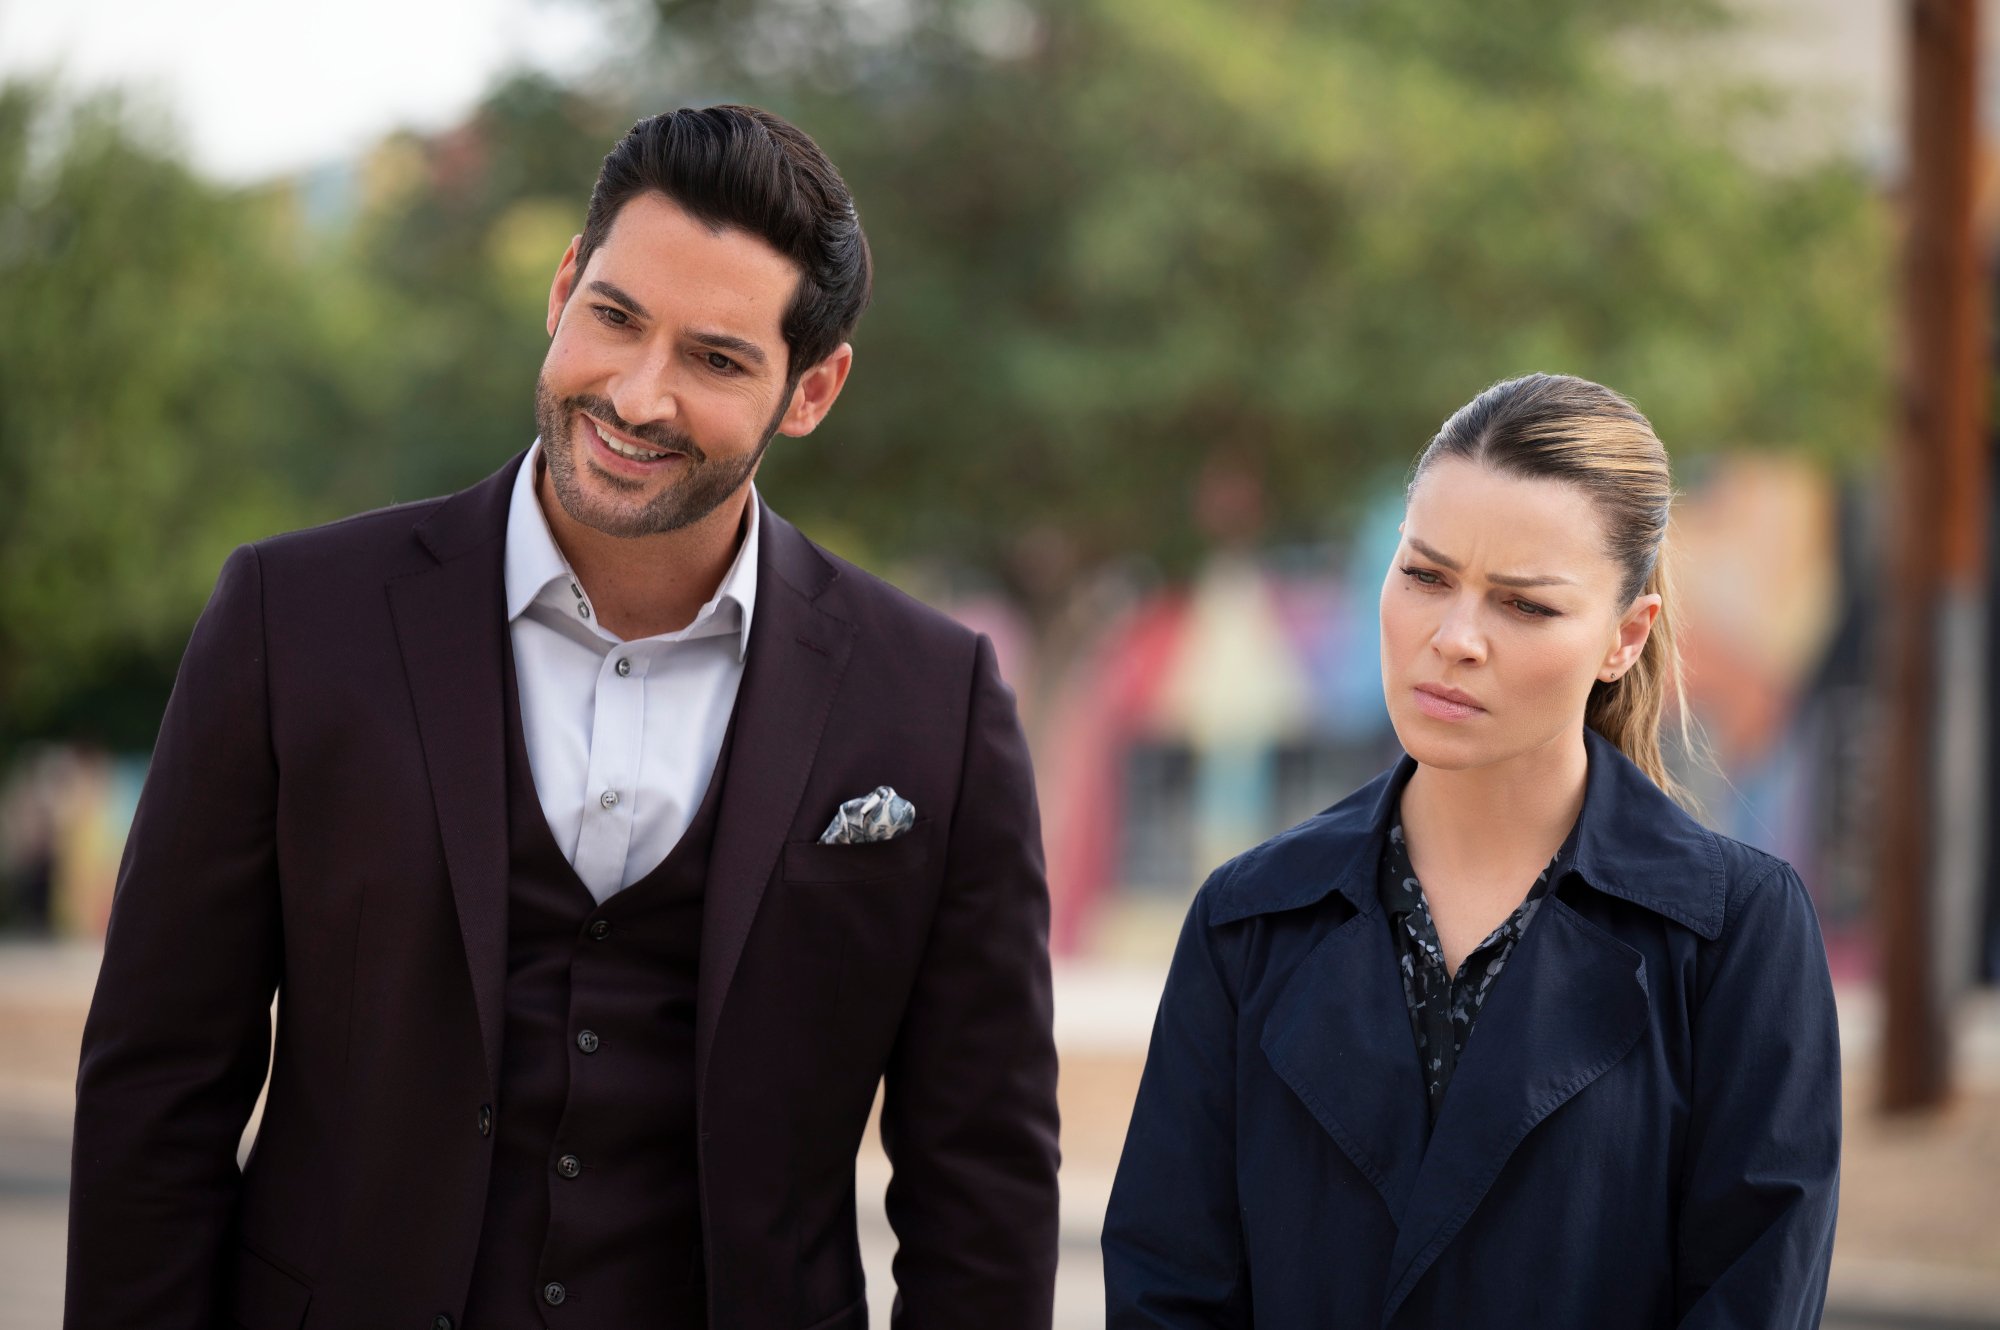 Tom Ellis and Lauren German in one of the episodes in 'Lucifer' Season 6. He's wearing a suit and smiling, and she has a concerned look on her face.